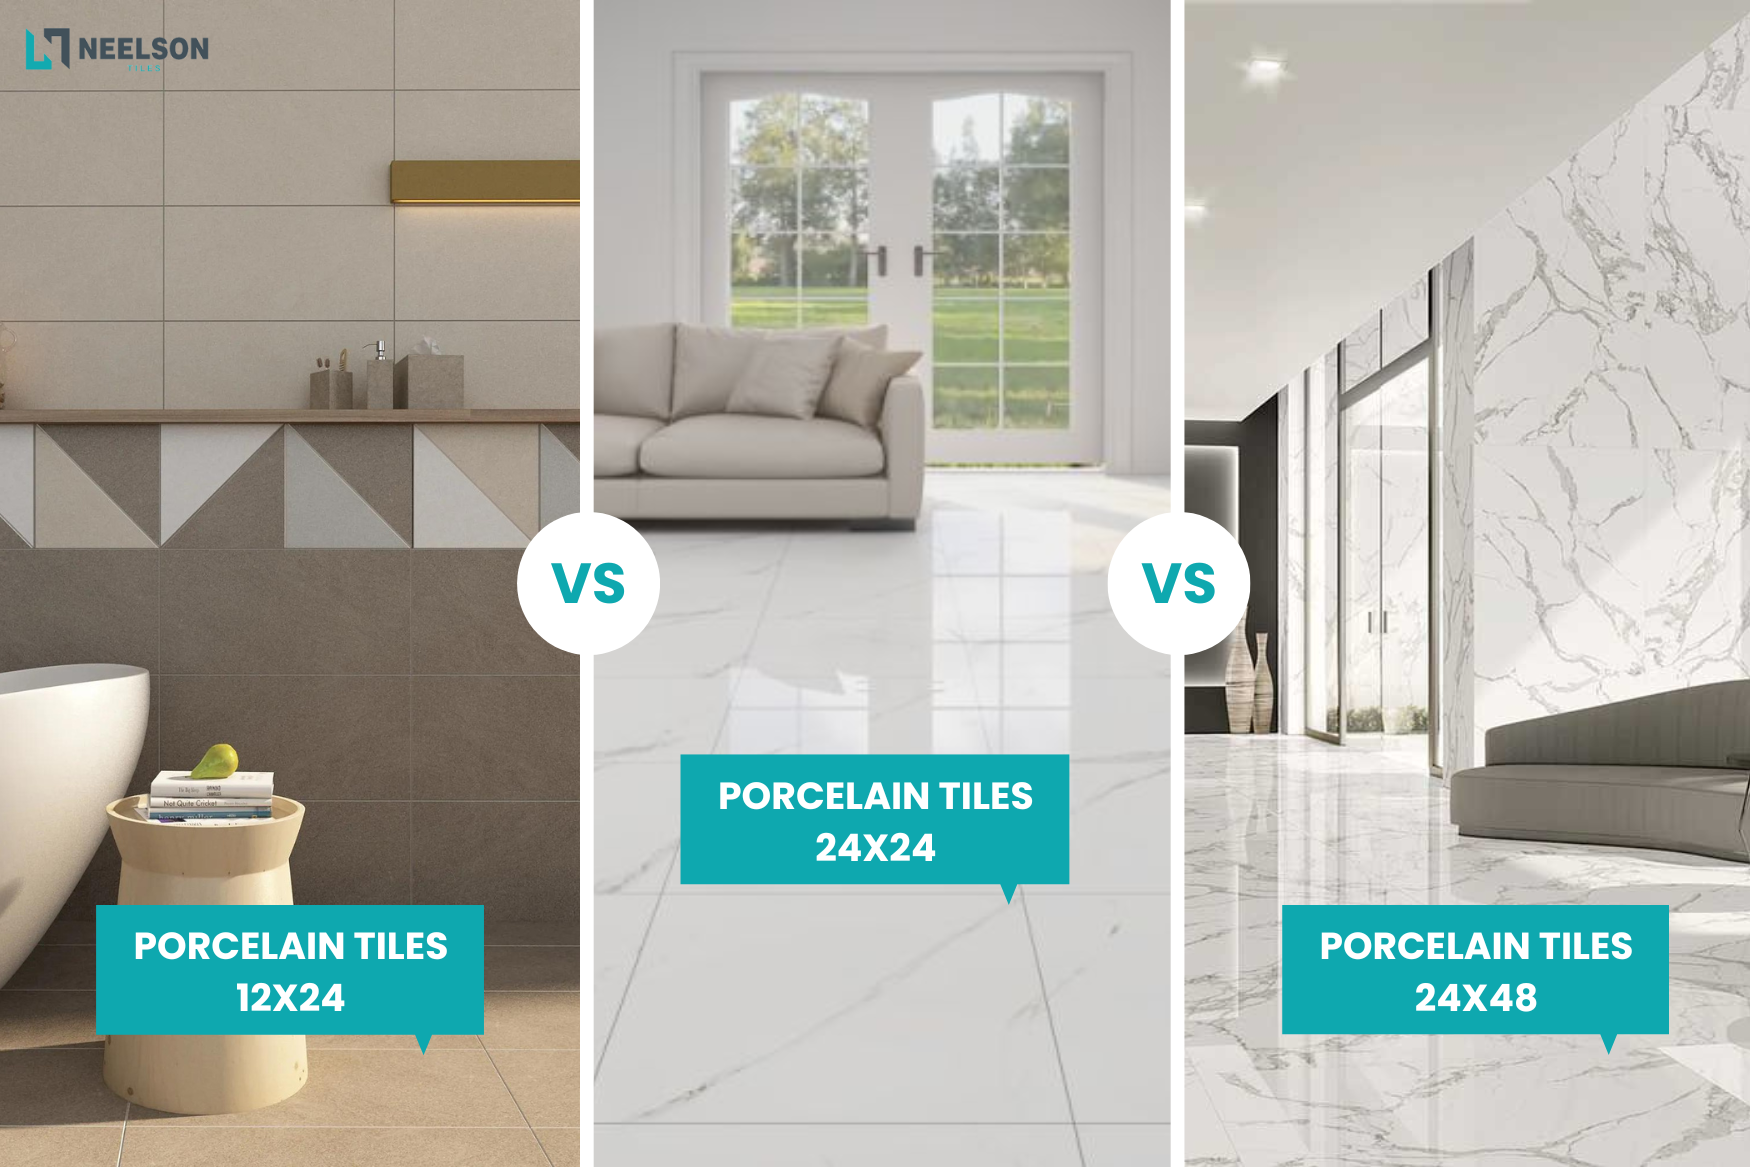 Comparing Porcelain Tiles 12x24 With Other Size Options